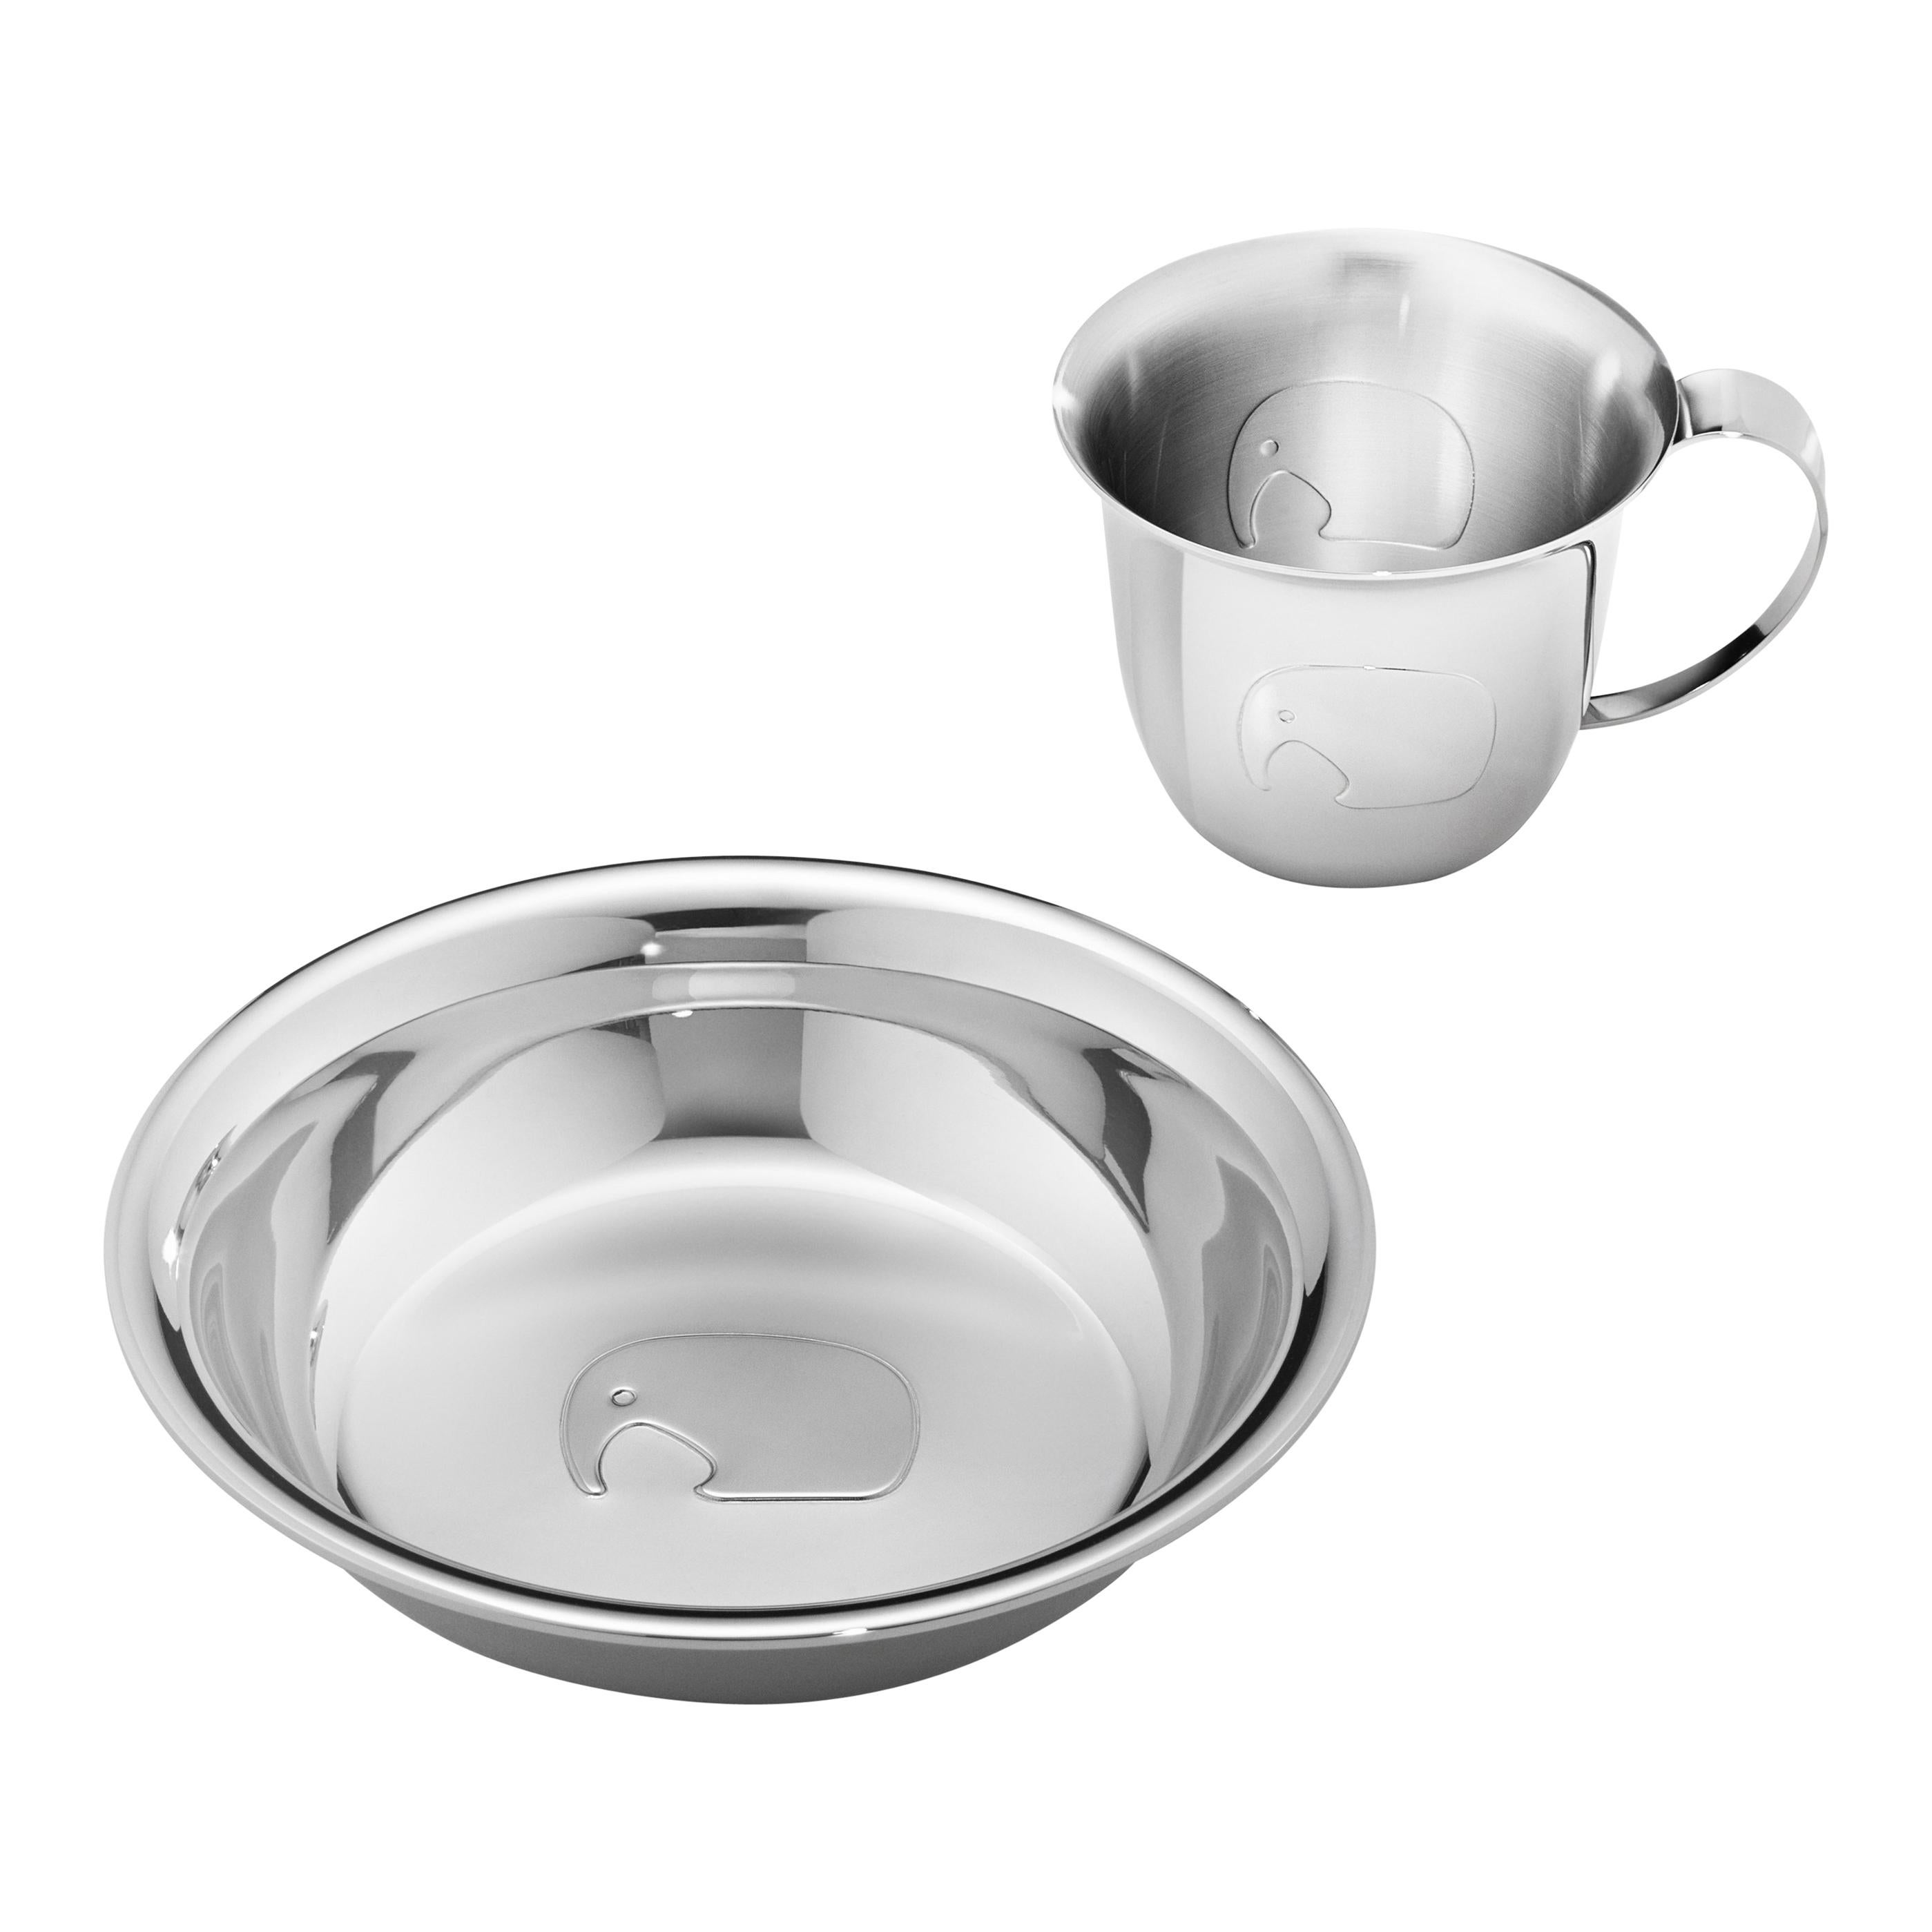 Georg Jensen Elephant Child Cup and Plate Stainless Steel Set by Jørgen Møller For Sale